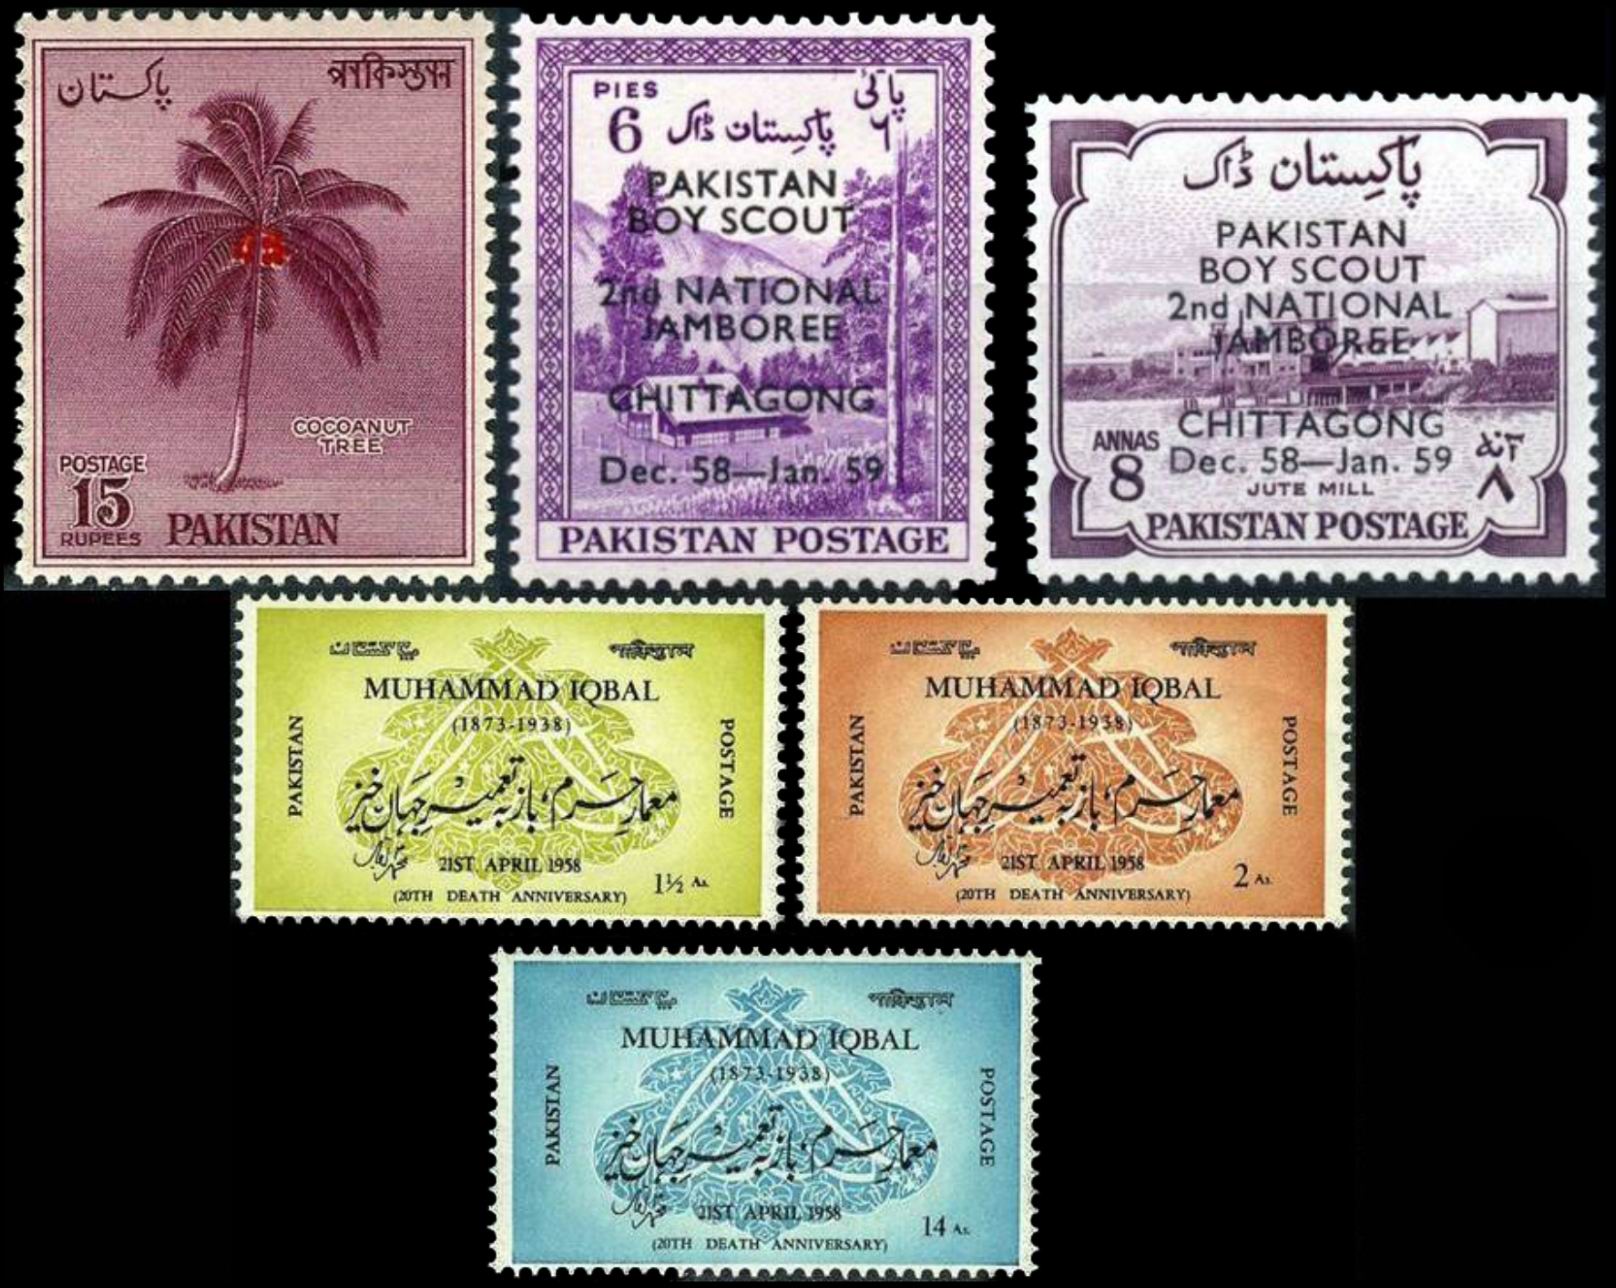 Pakistan Stamps 1947 -2020 Complete Collection MNH - Click Image to Close